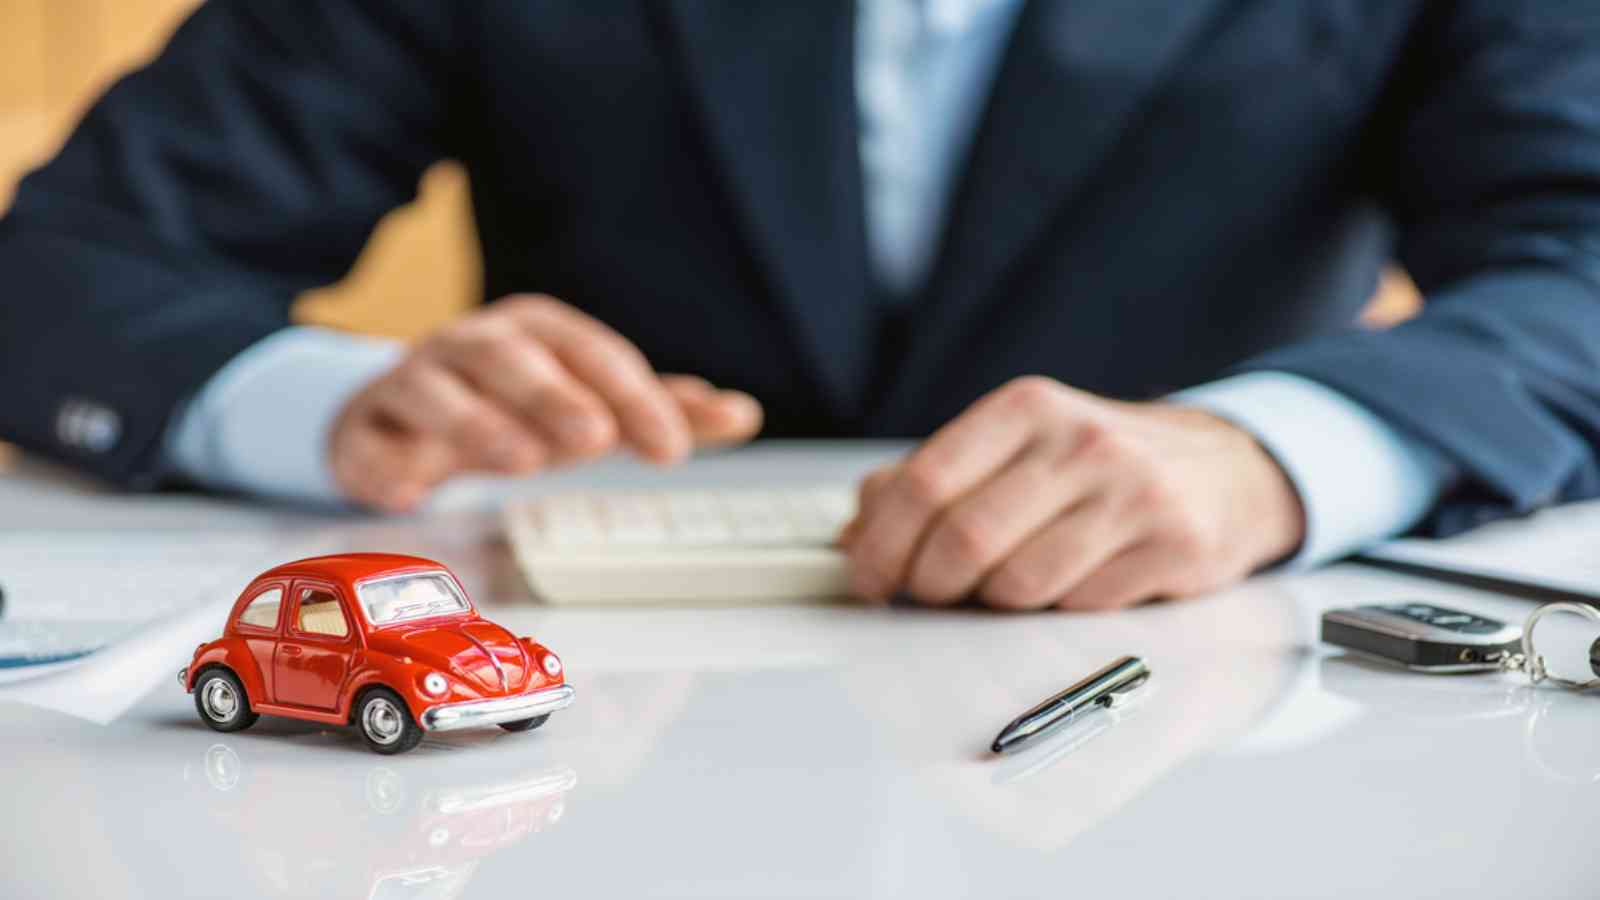 Car Insurance Day 2023: Date, History, Types of Car Insurance